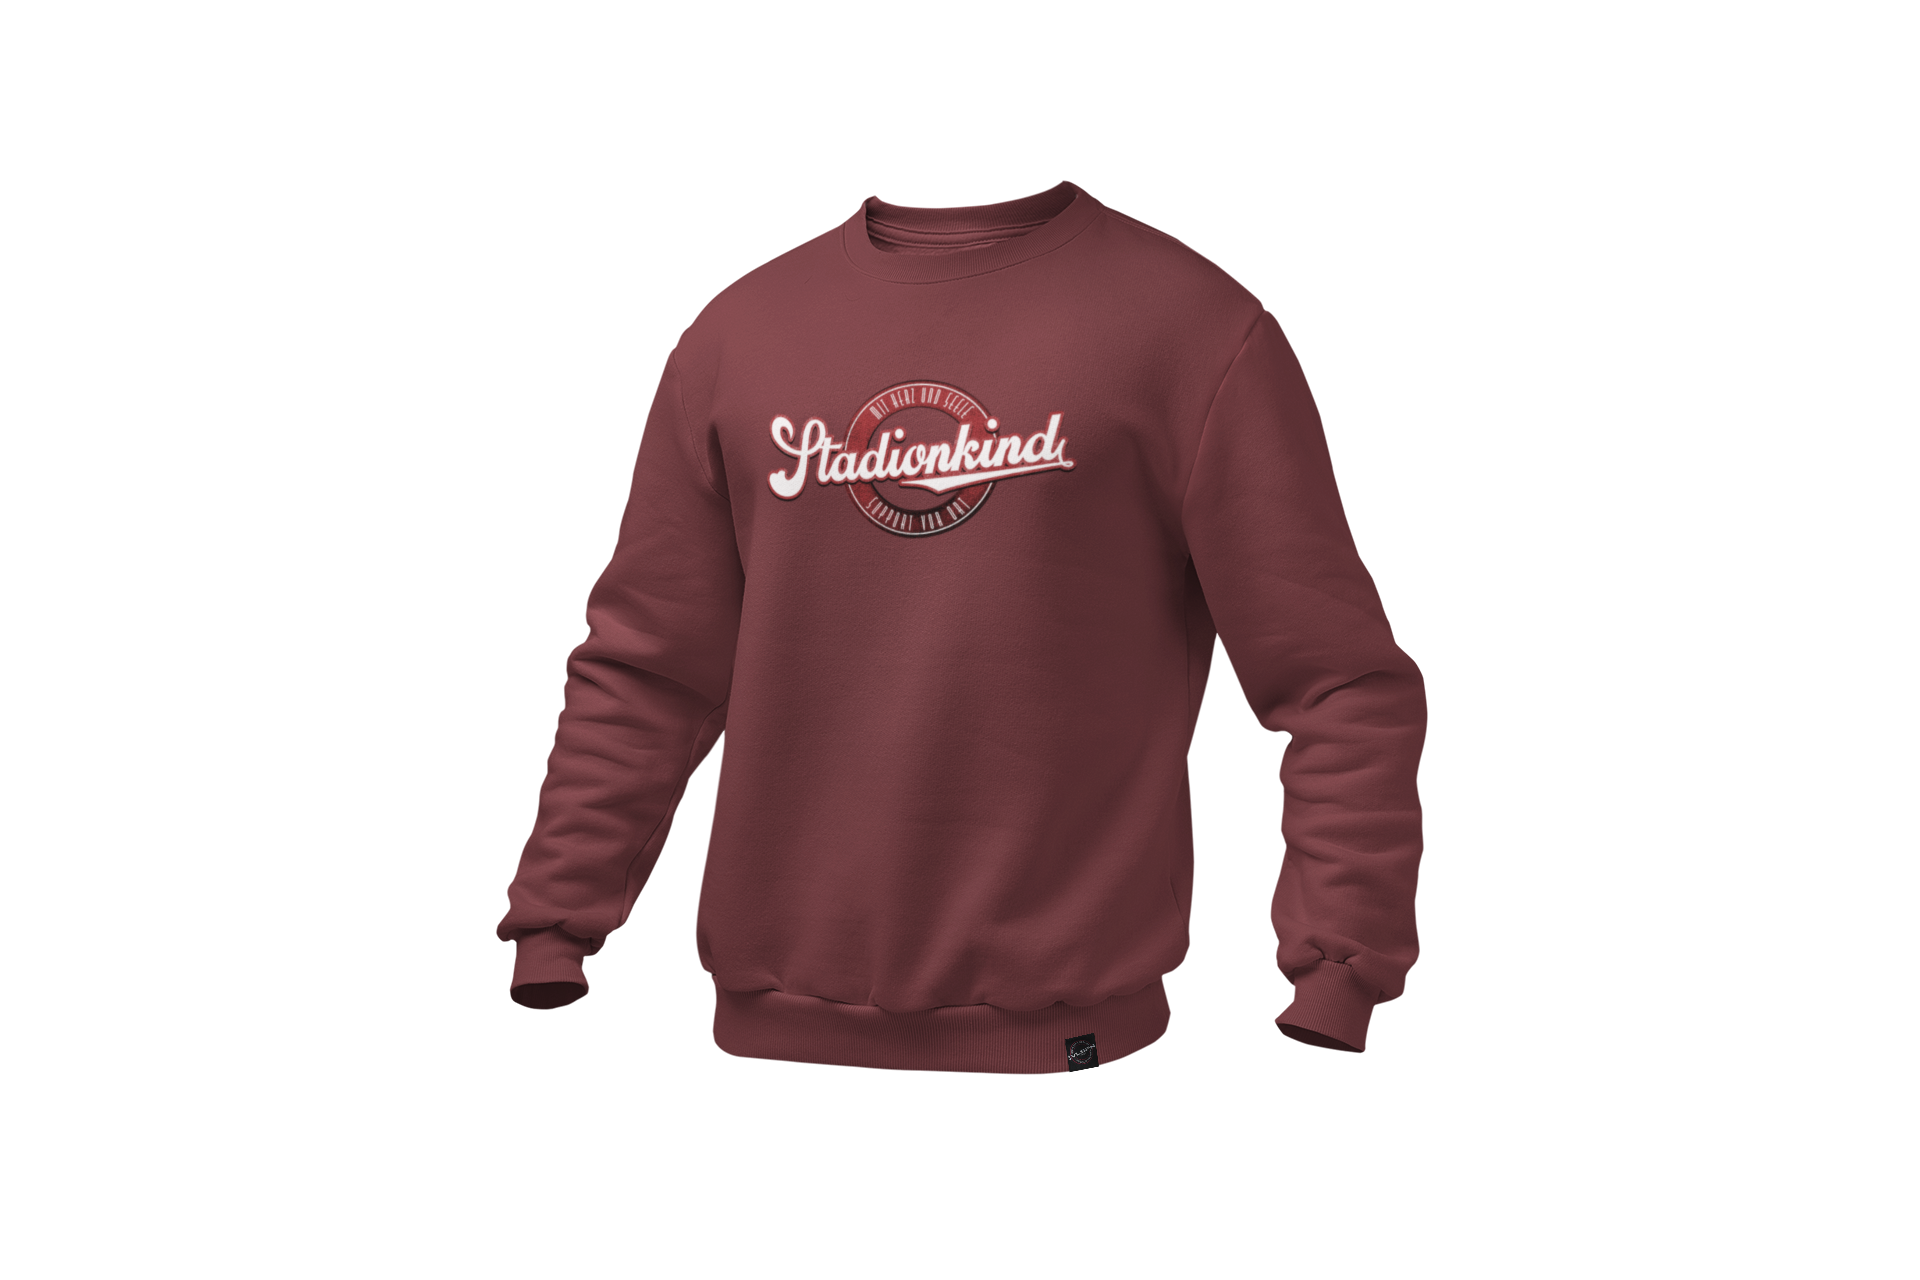 mockup-of-a-ghosted-crewneck-sweatshirt-over-a-solid-background-26960 (67).png